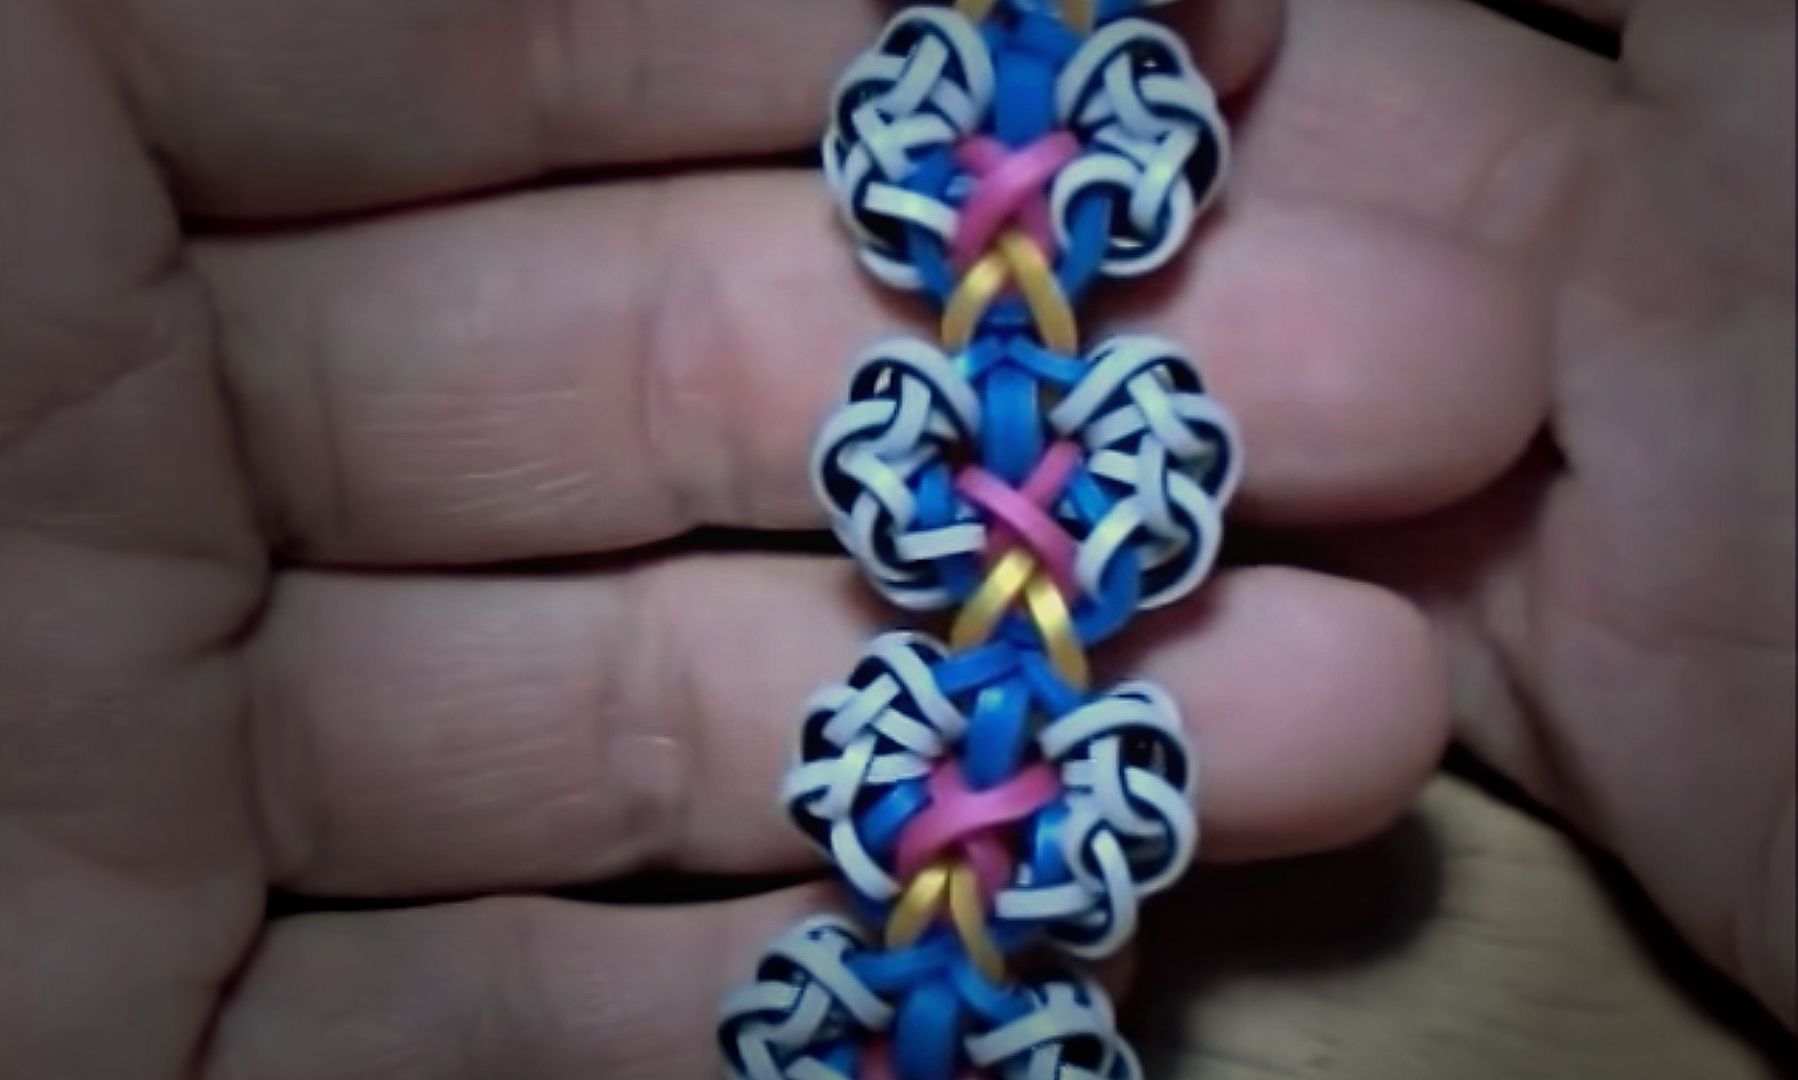 How to make the Angeline pattern loom band with your fingers |tutorial Jay Salvarez on YouTube